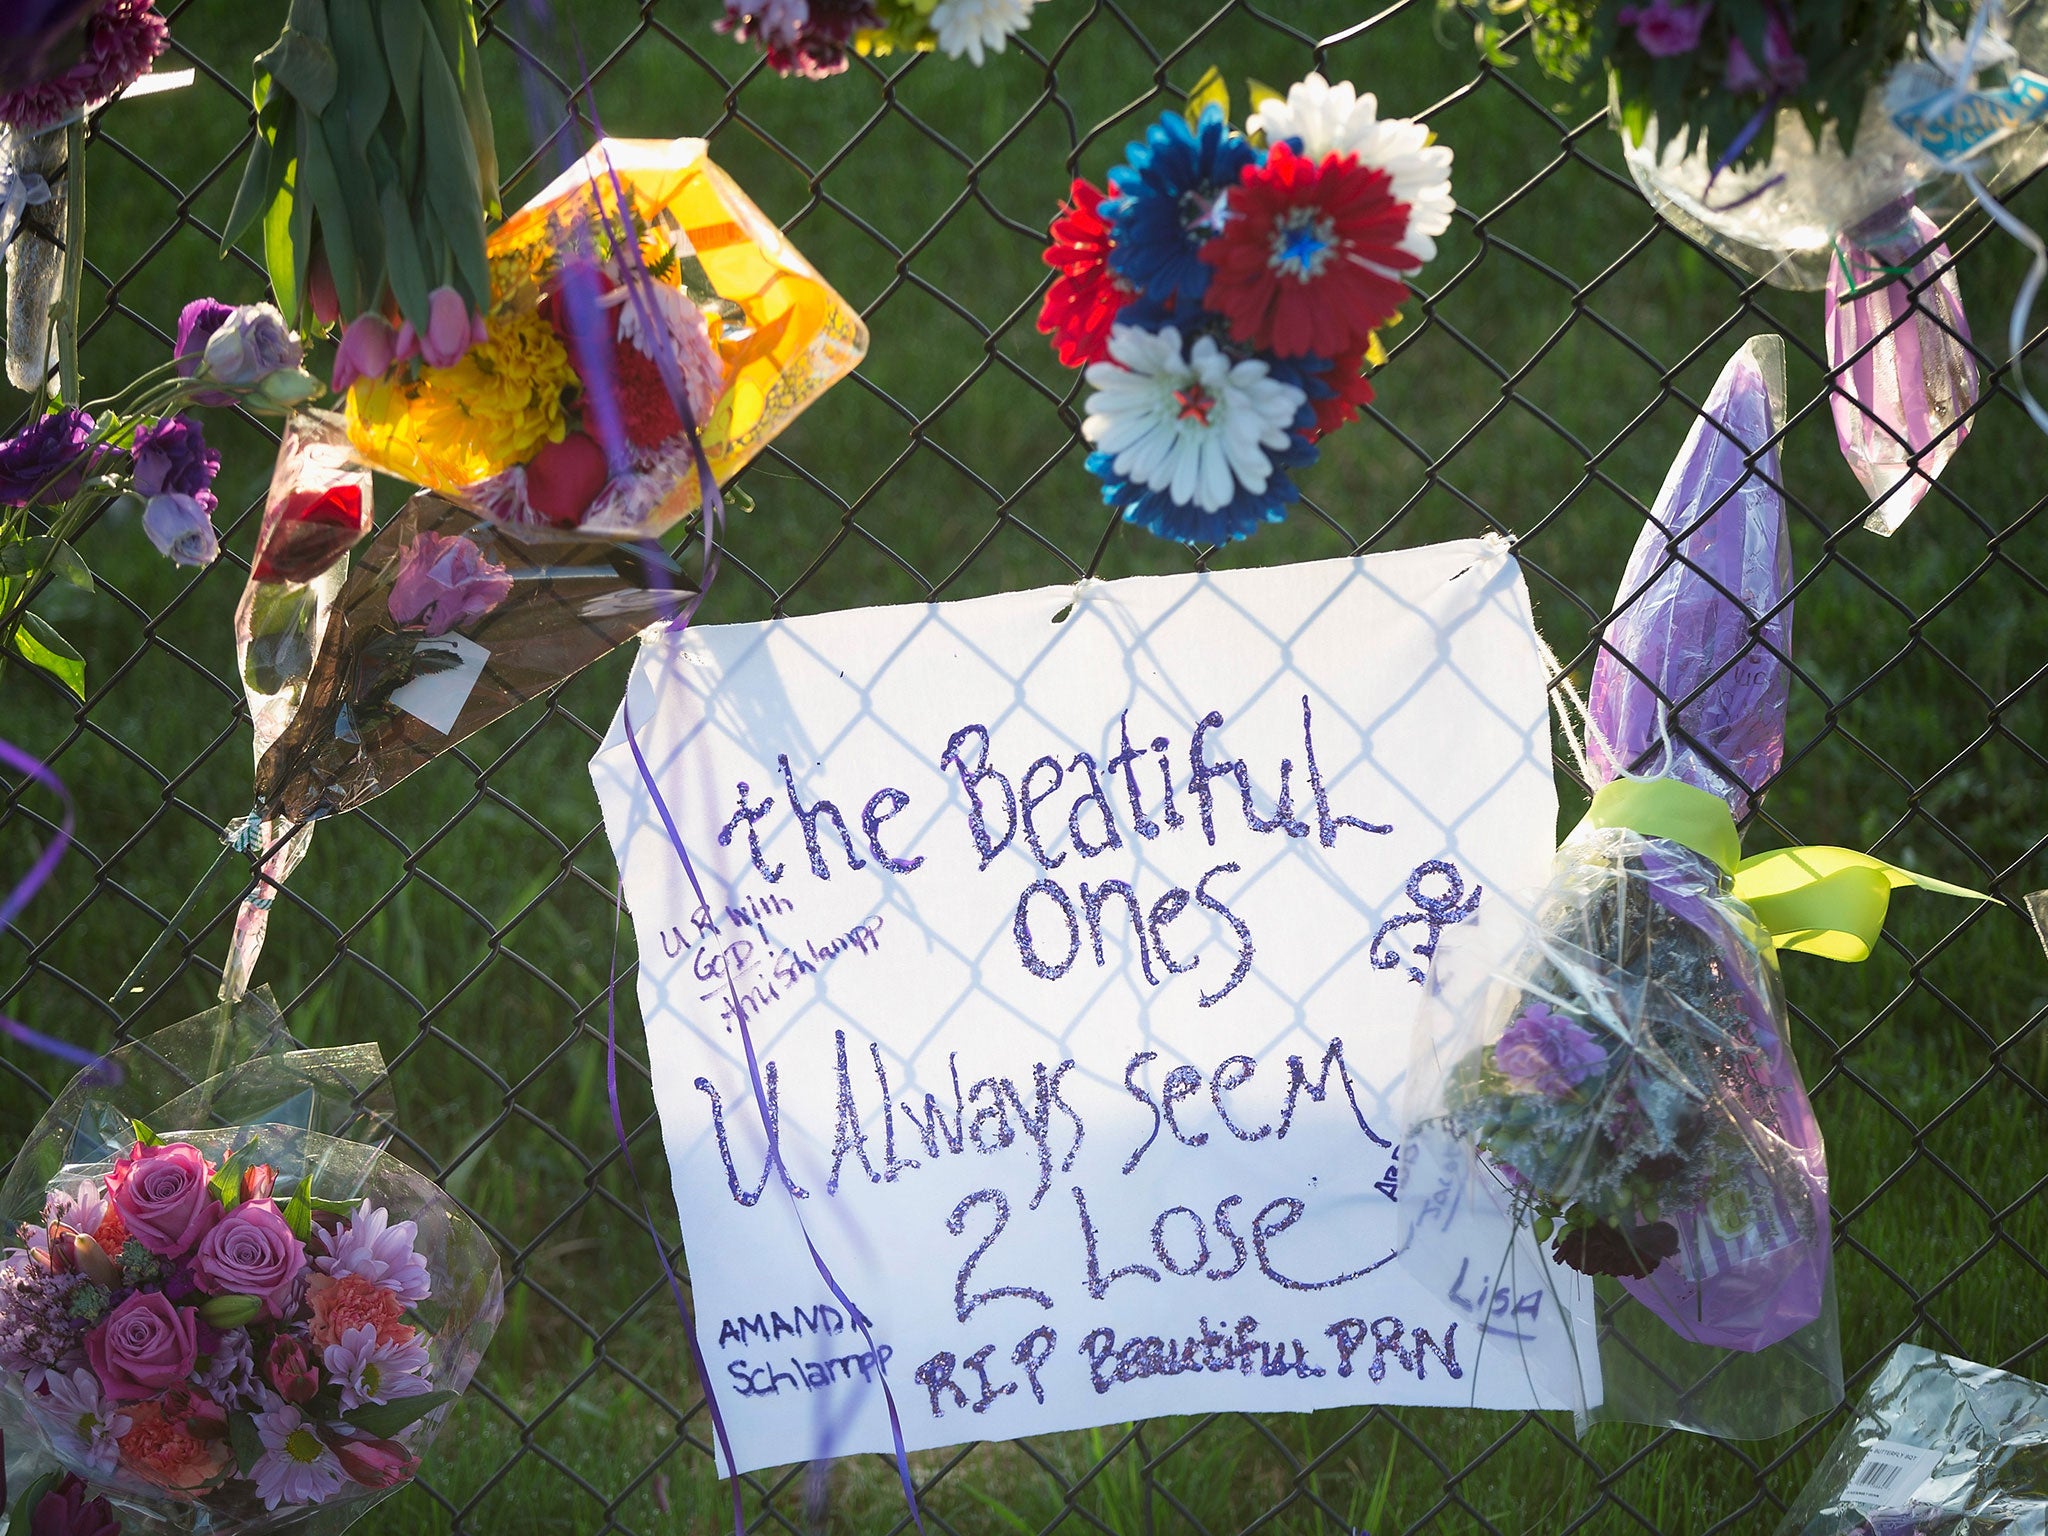 A tribute to the singer outside his Paisley Park home in Minneapolis